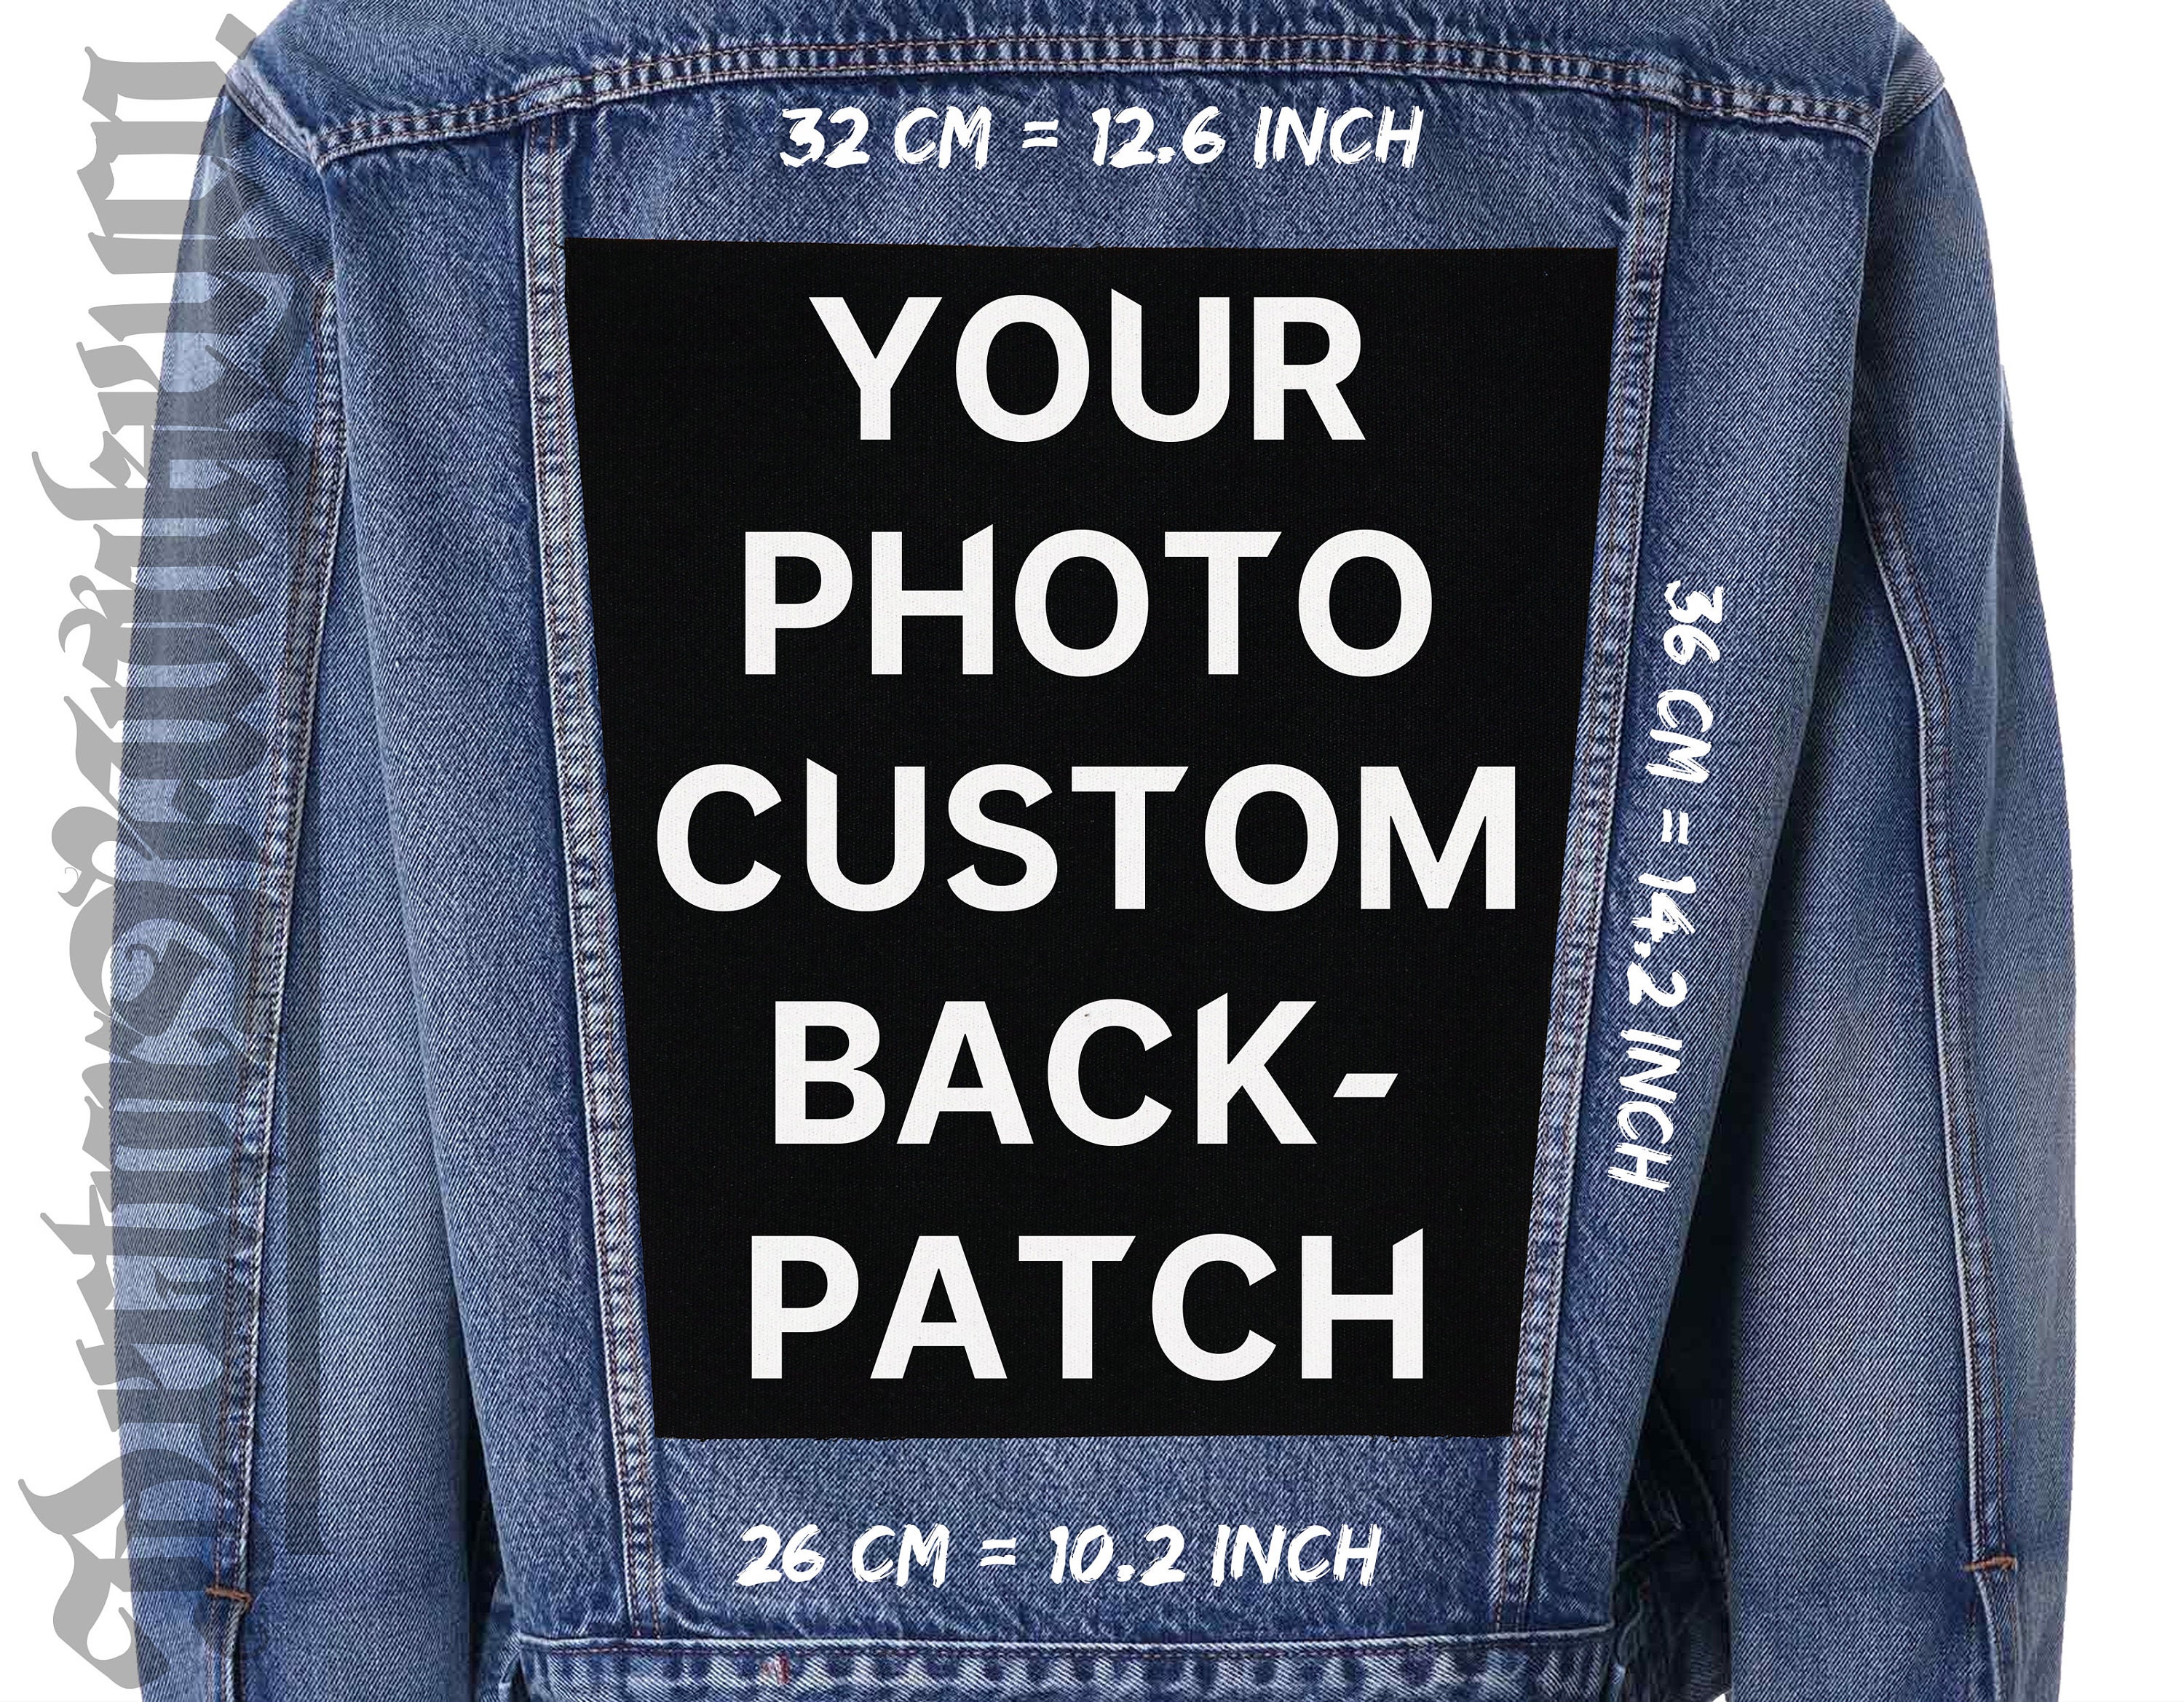 Personalized Large Cotton Canvas Back Patch Custom Photo Backpatch for  Jackets,vest and Flannels 